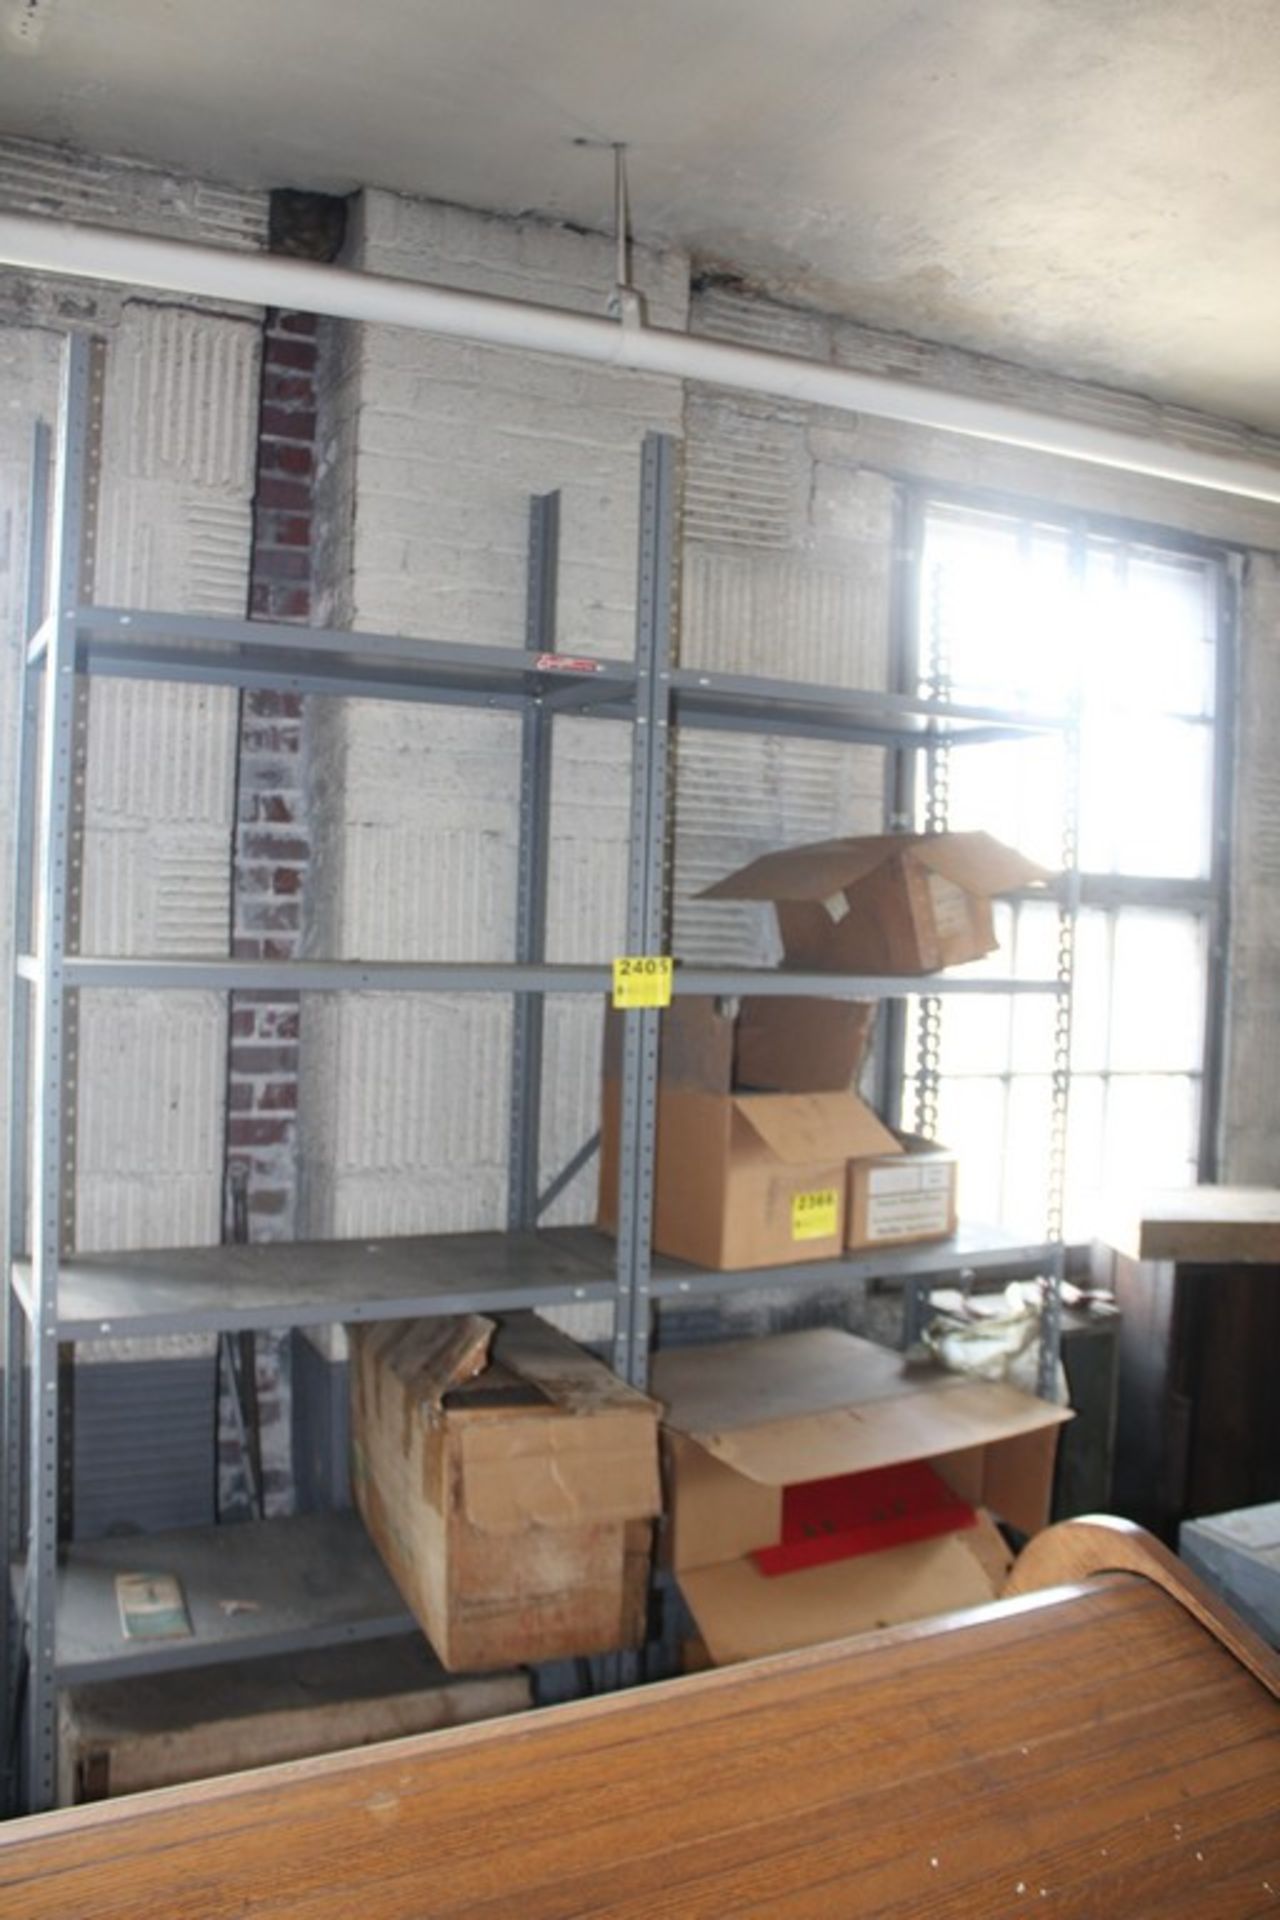 2 SECTIONS OF 18"X36"X84" ADJUSTABLE METAL SHELVING